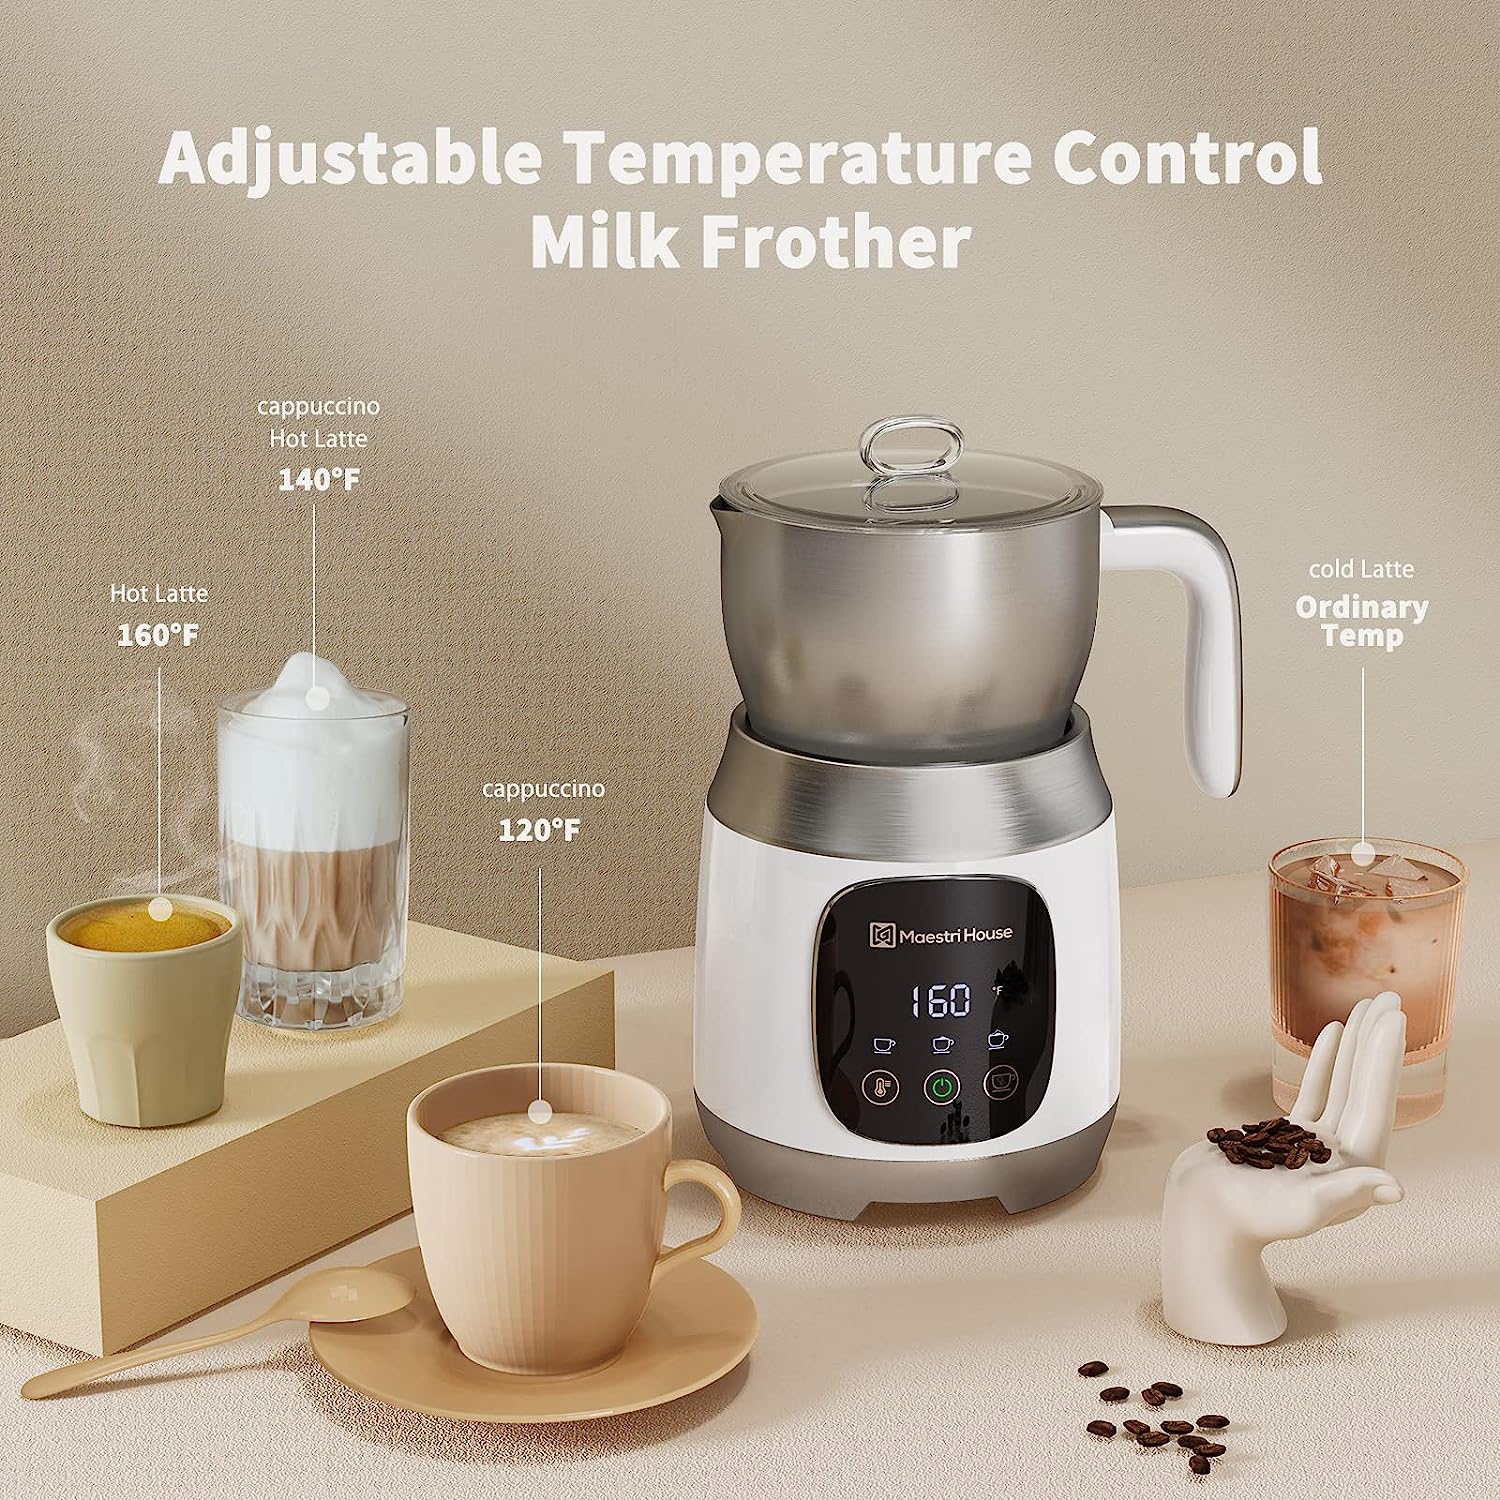 Maestri House MMF-9304-W 21oz Smart Touch Control,Variable Temp and Froth Thickness Detachable Milk Frother White